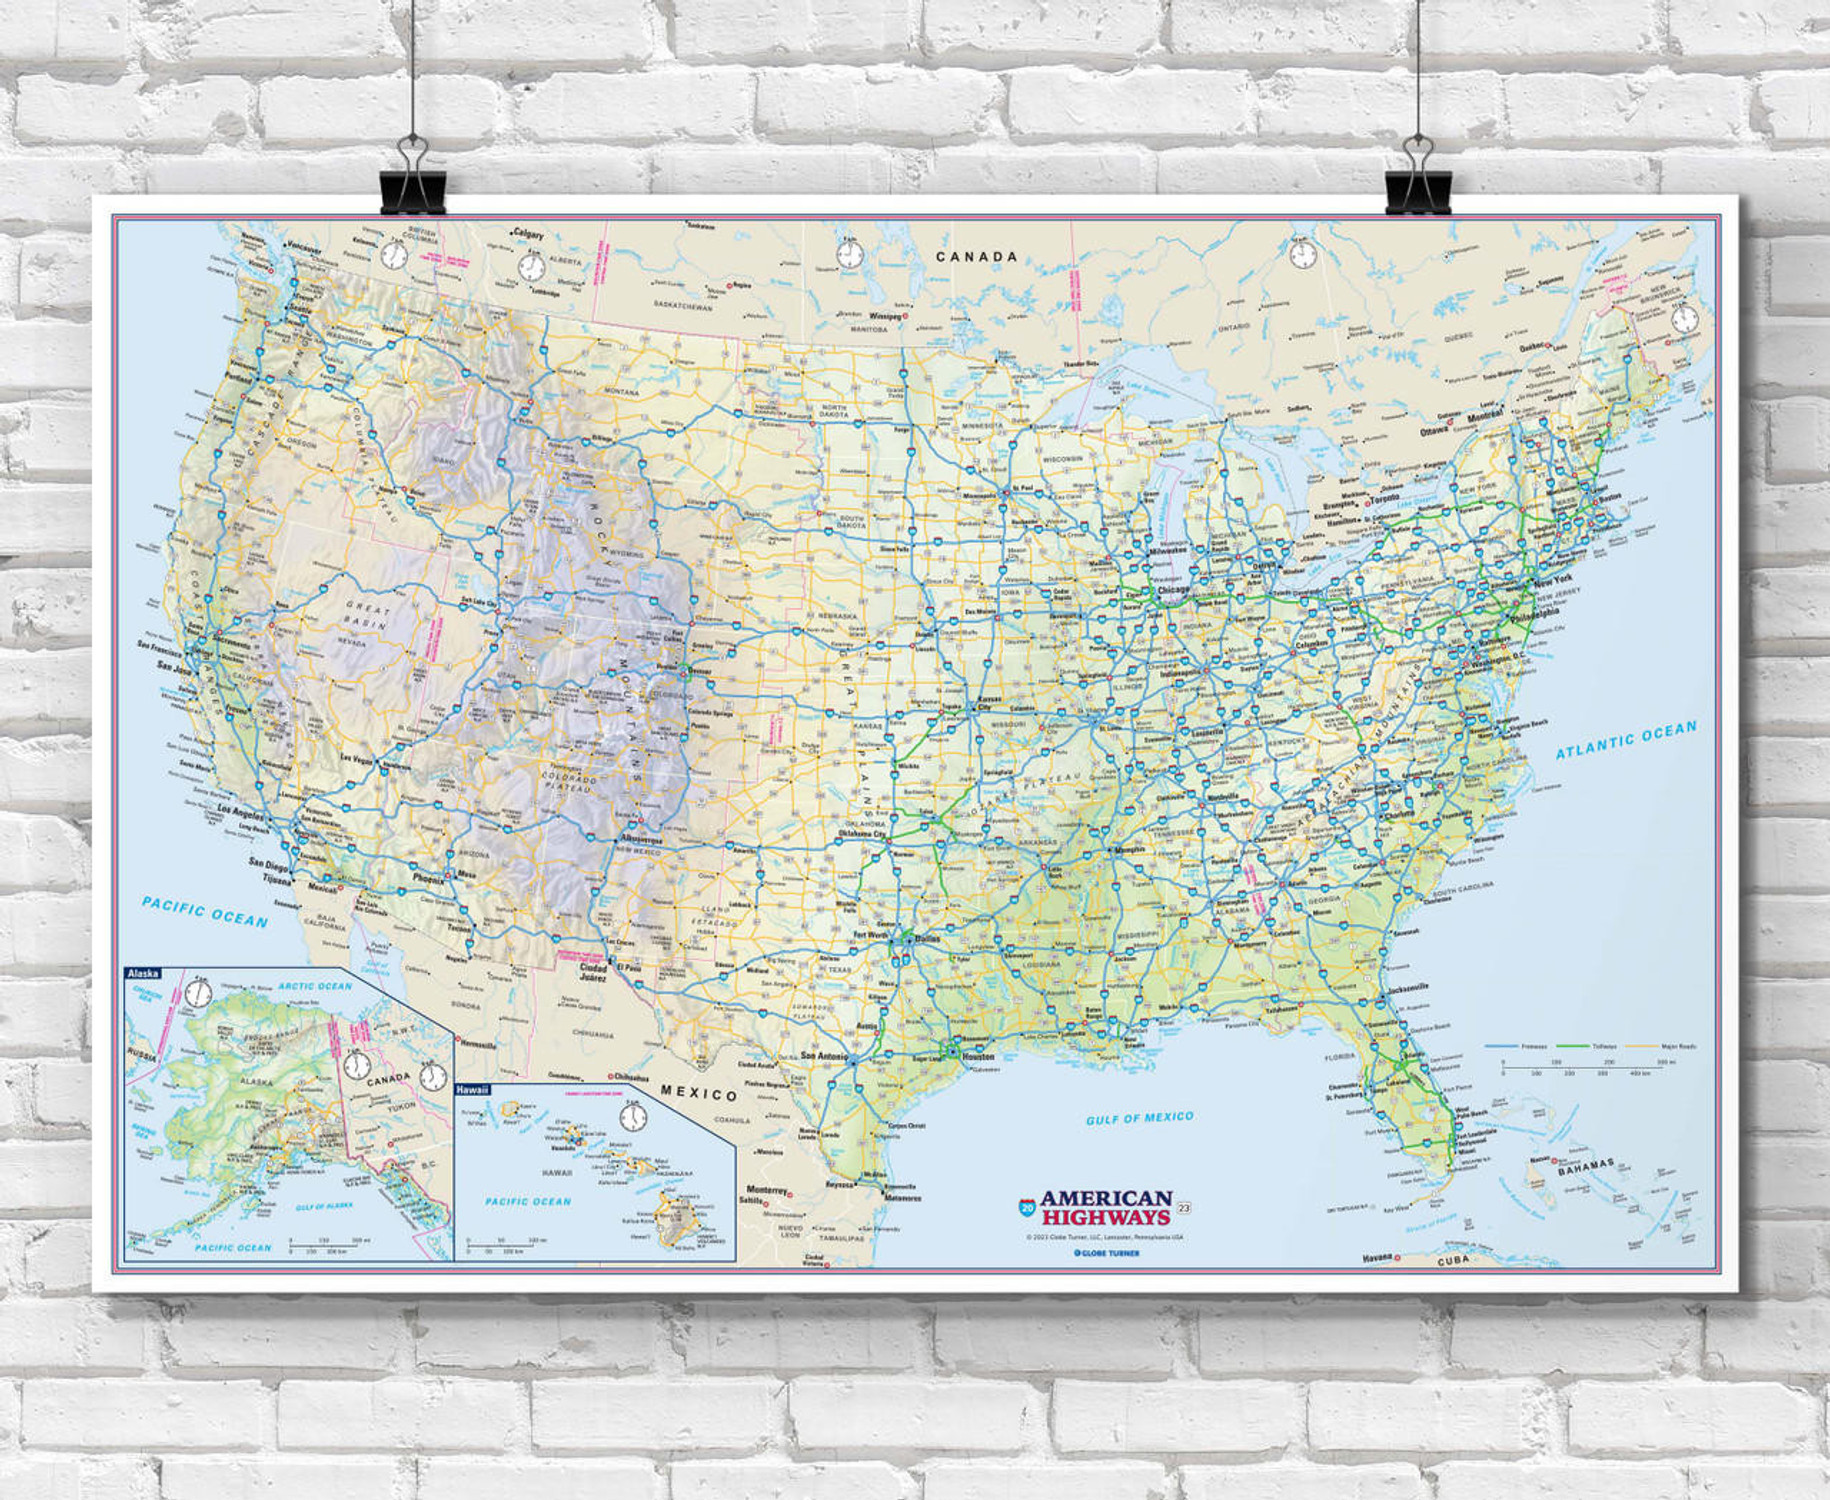 US Interstate Map - hanging on clips in front of white brick wall | World Maps Online